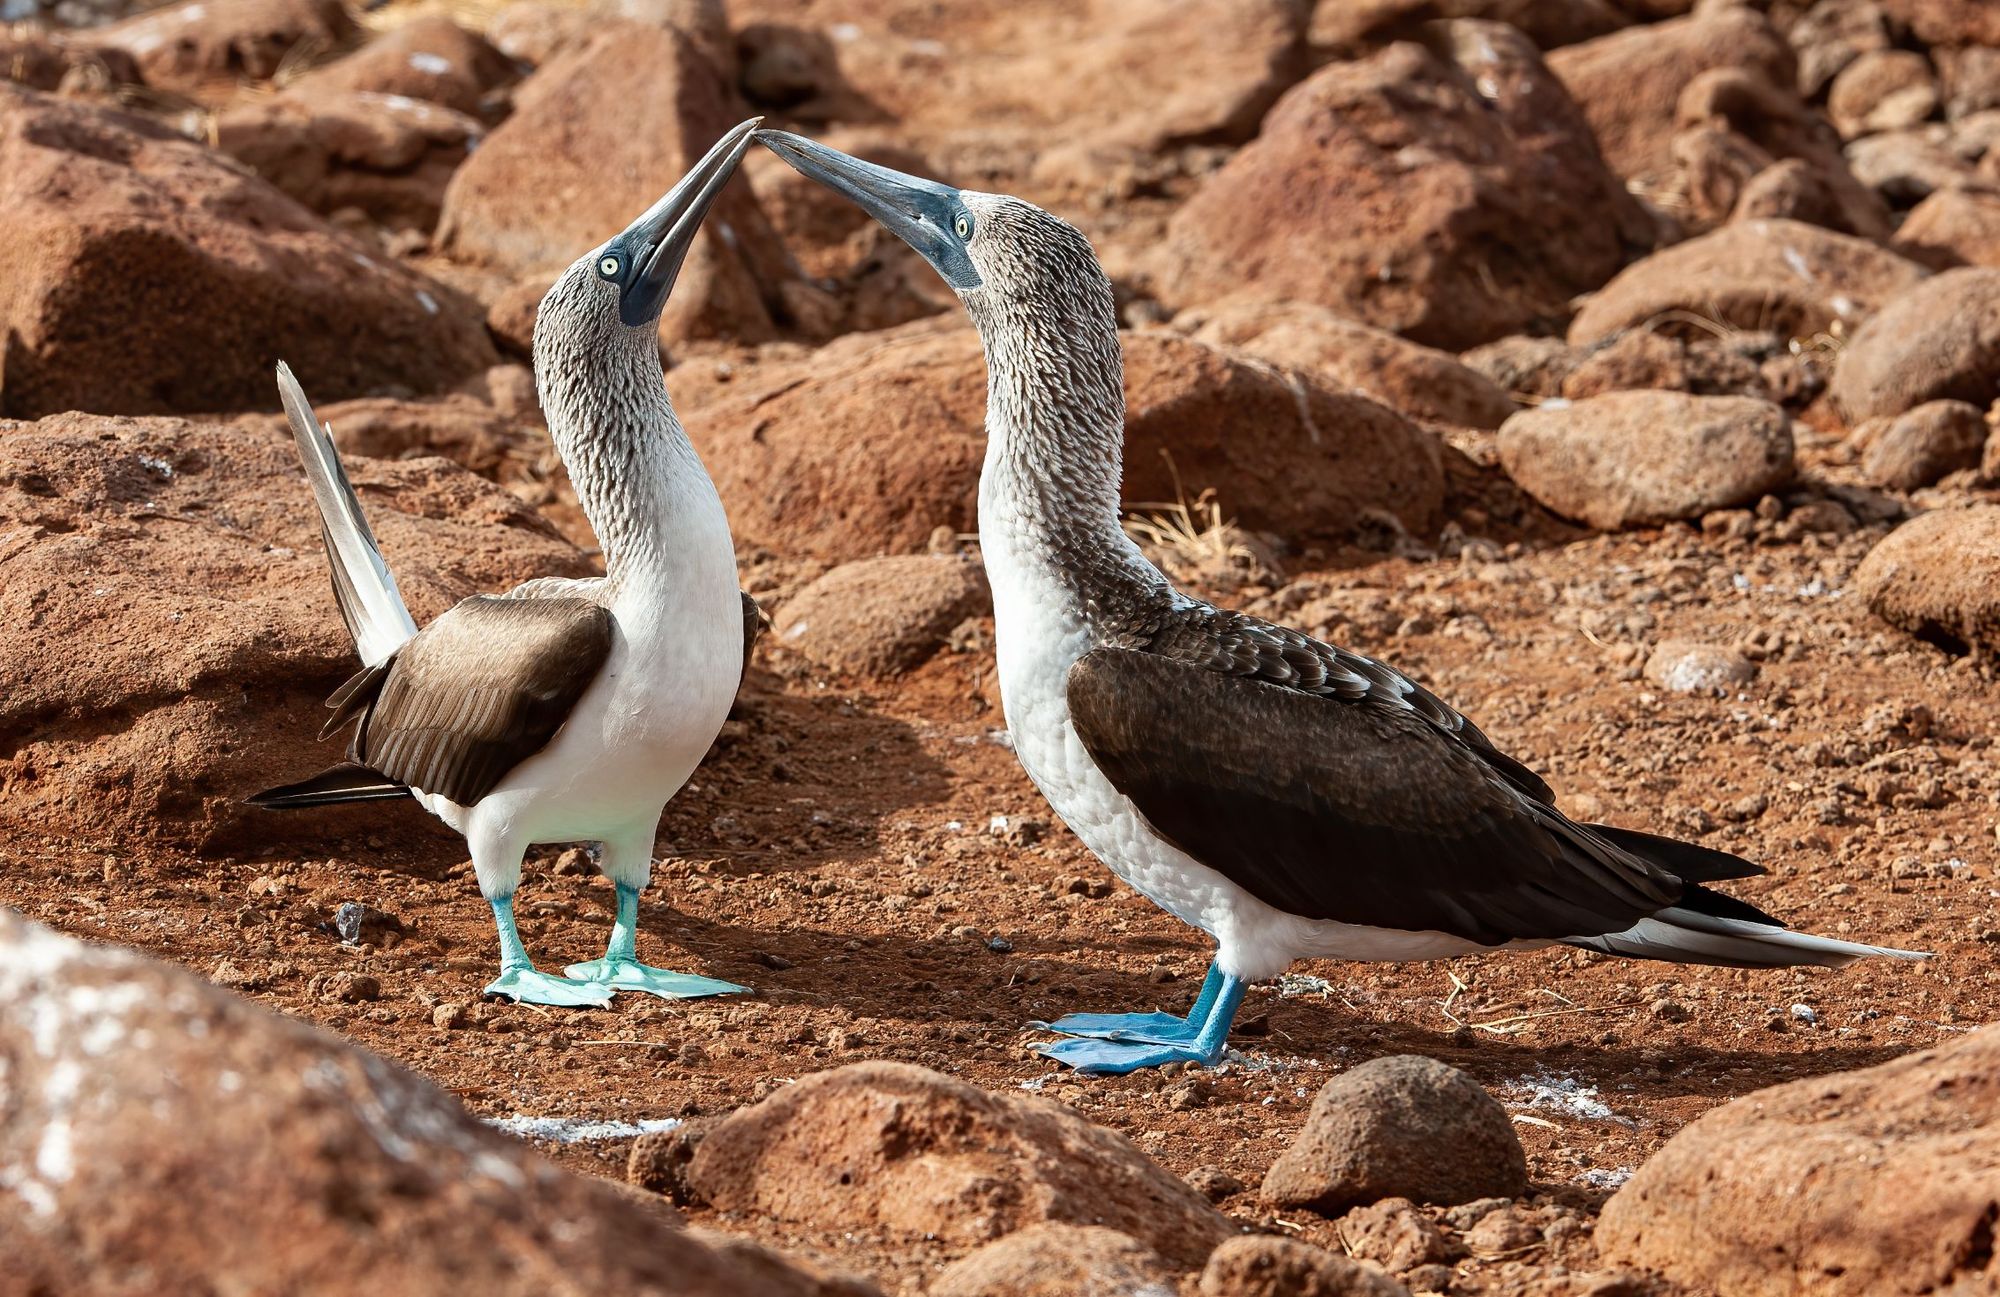 Two blue-footed boobies conducting a courtship ritual. Photo: Getty.